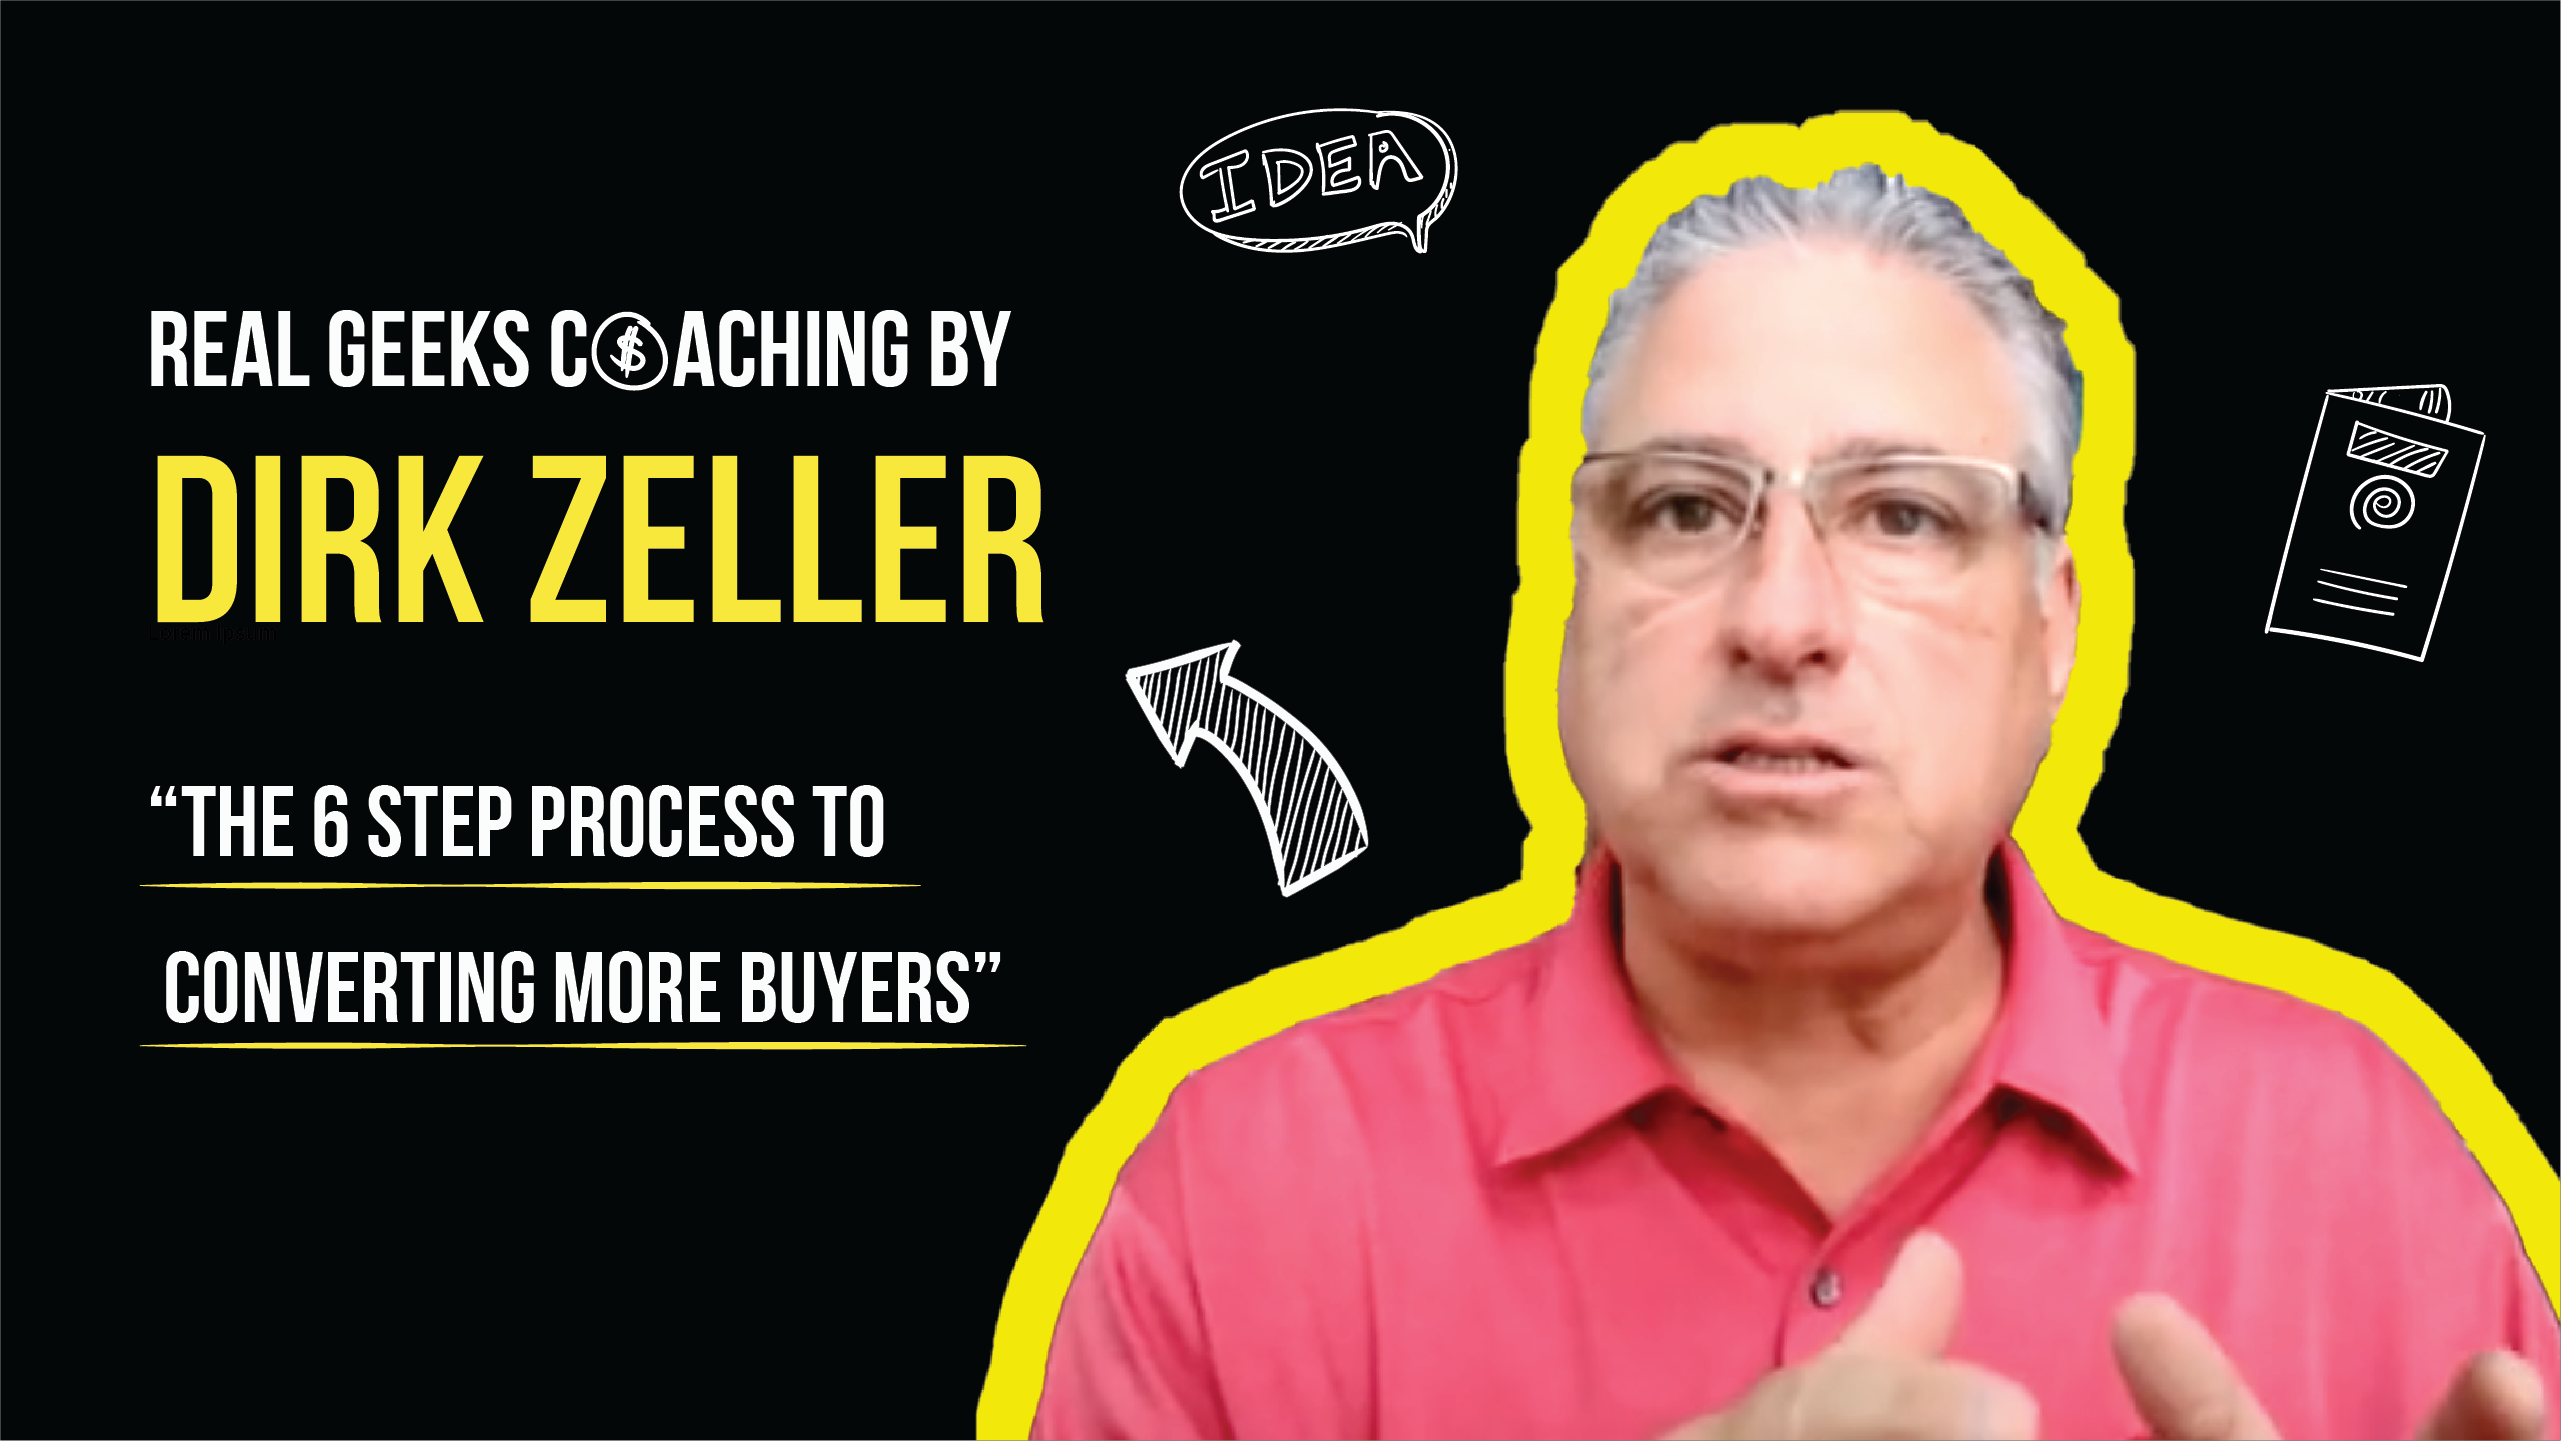 Dirk Zeller: The 6 Step Process to Converting More Buyers